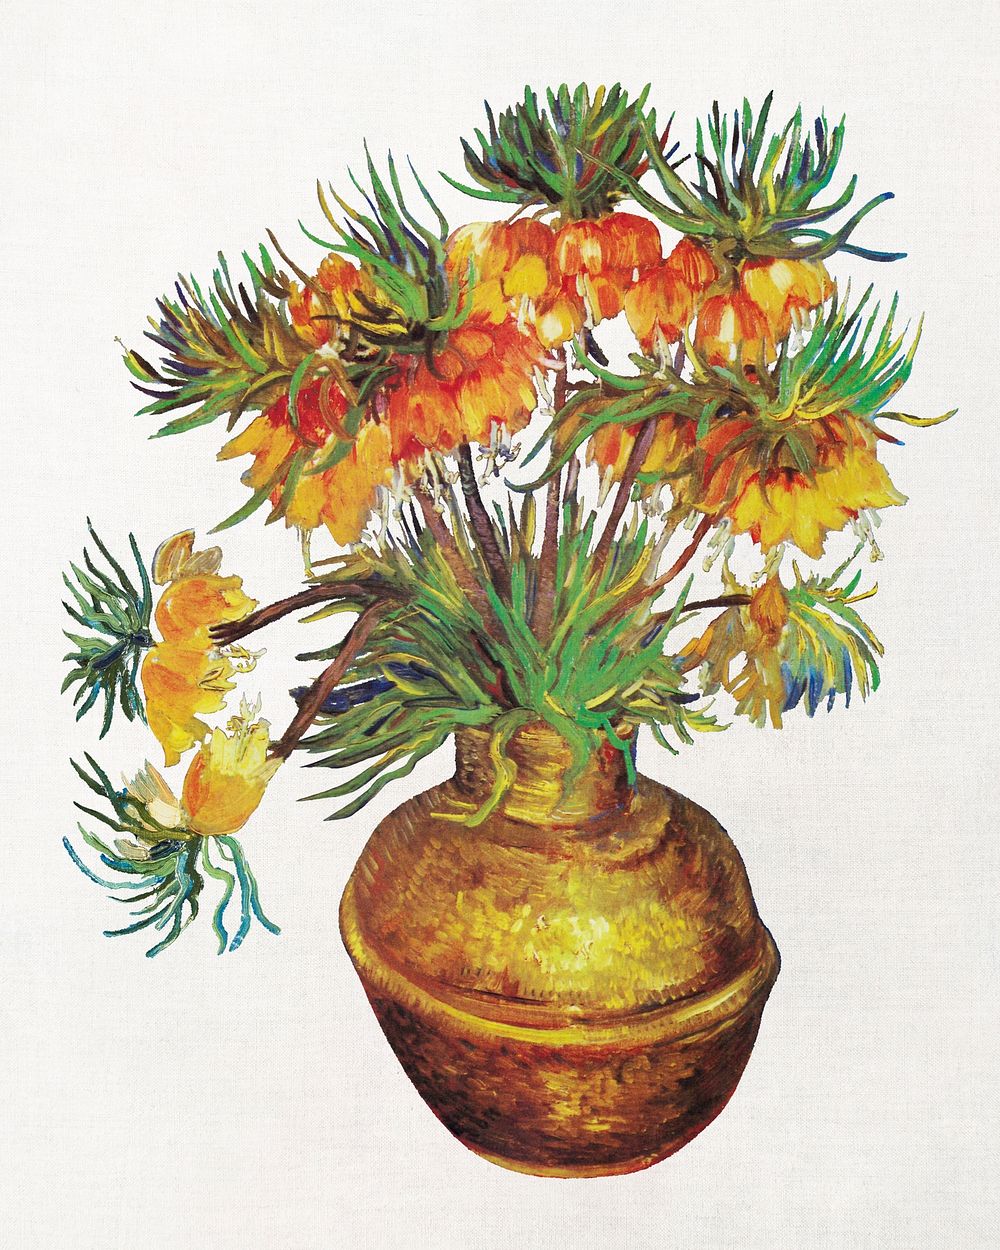 Imperial Fritillaries in a Copper Vase clipart, Van Gogh-inspired famous flower illustration psd